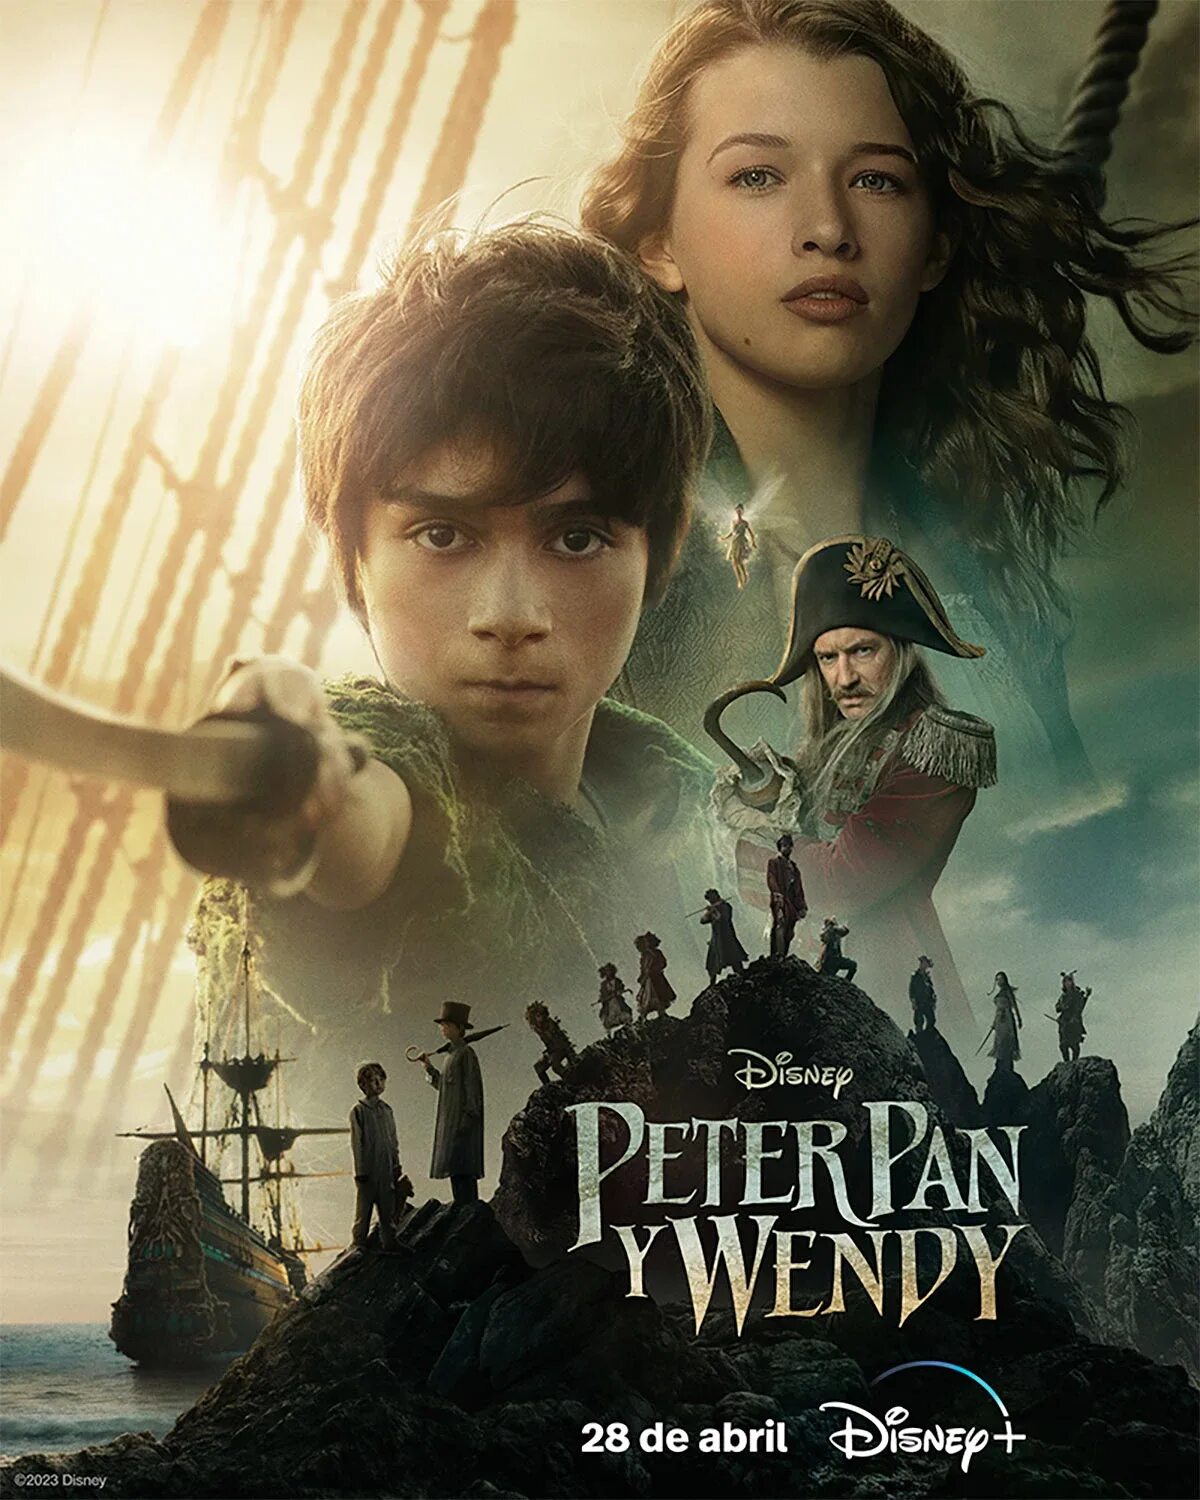 Peter Pan and Wendy 2023.